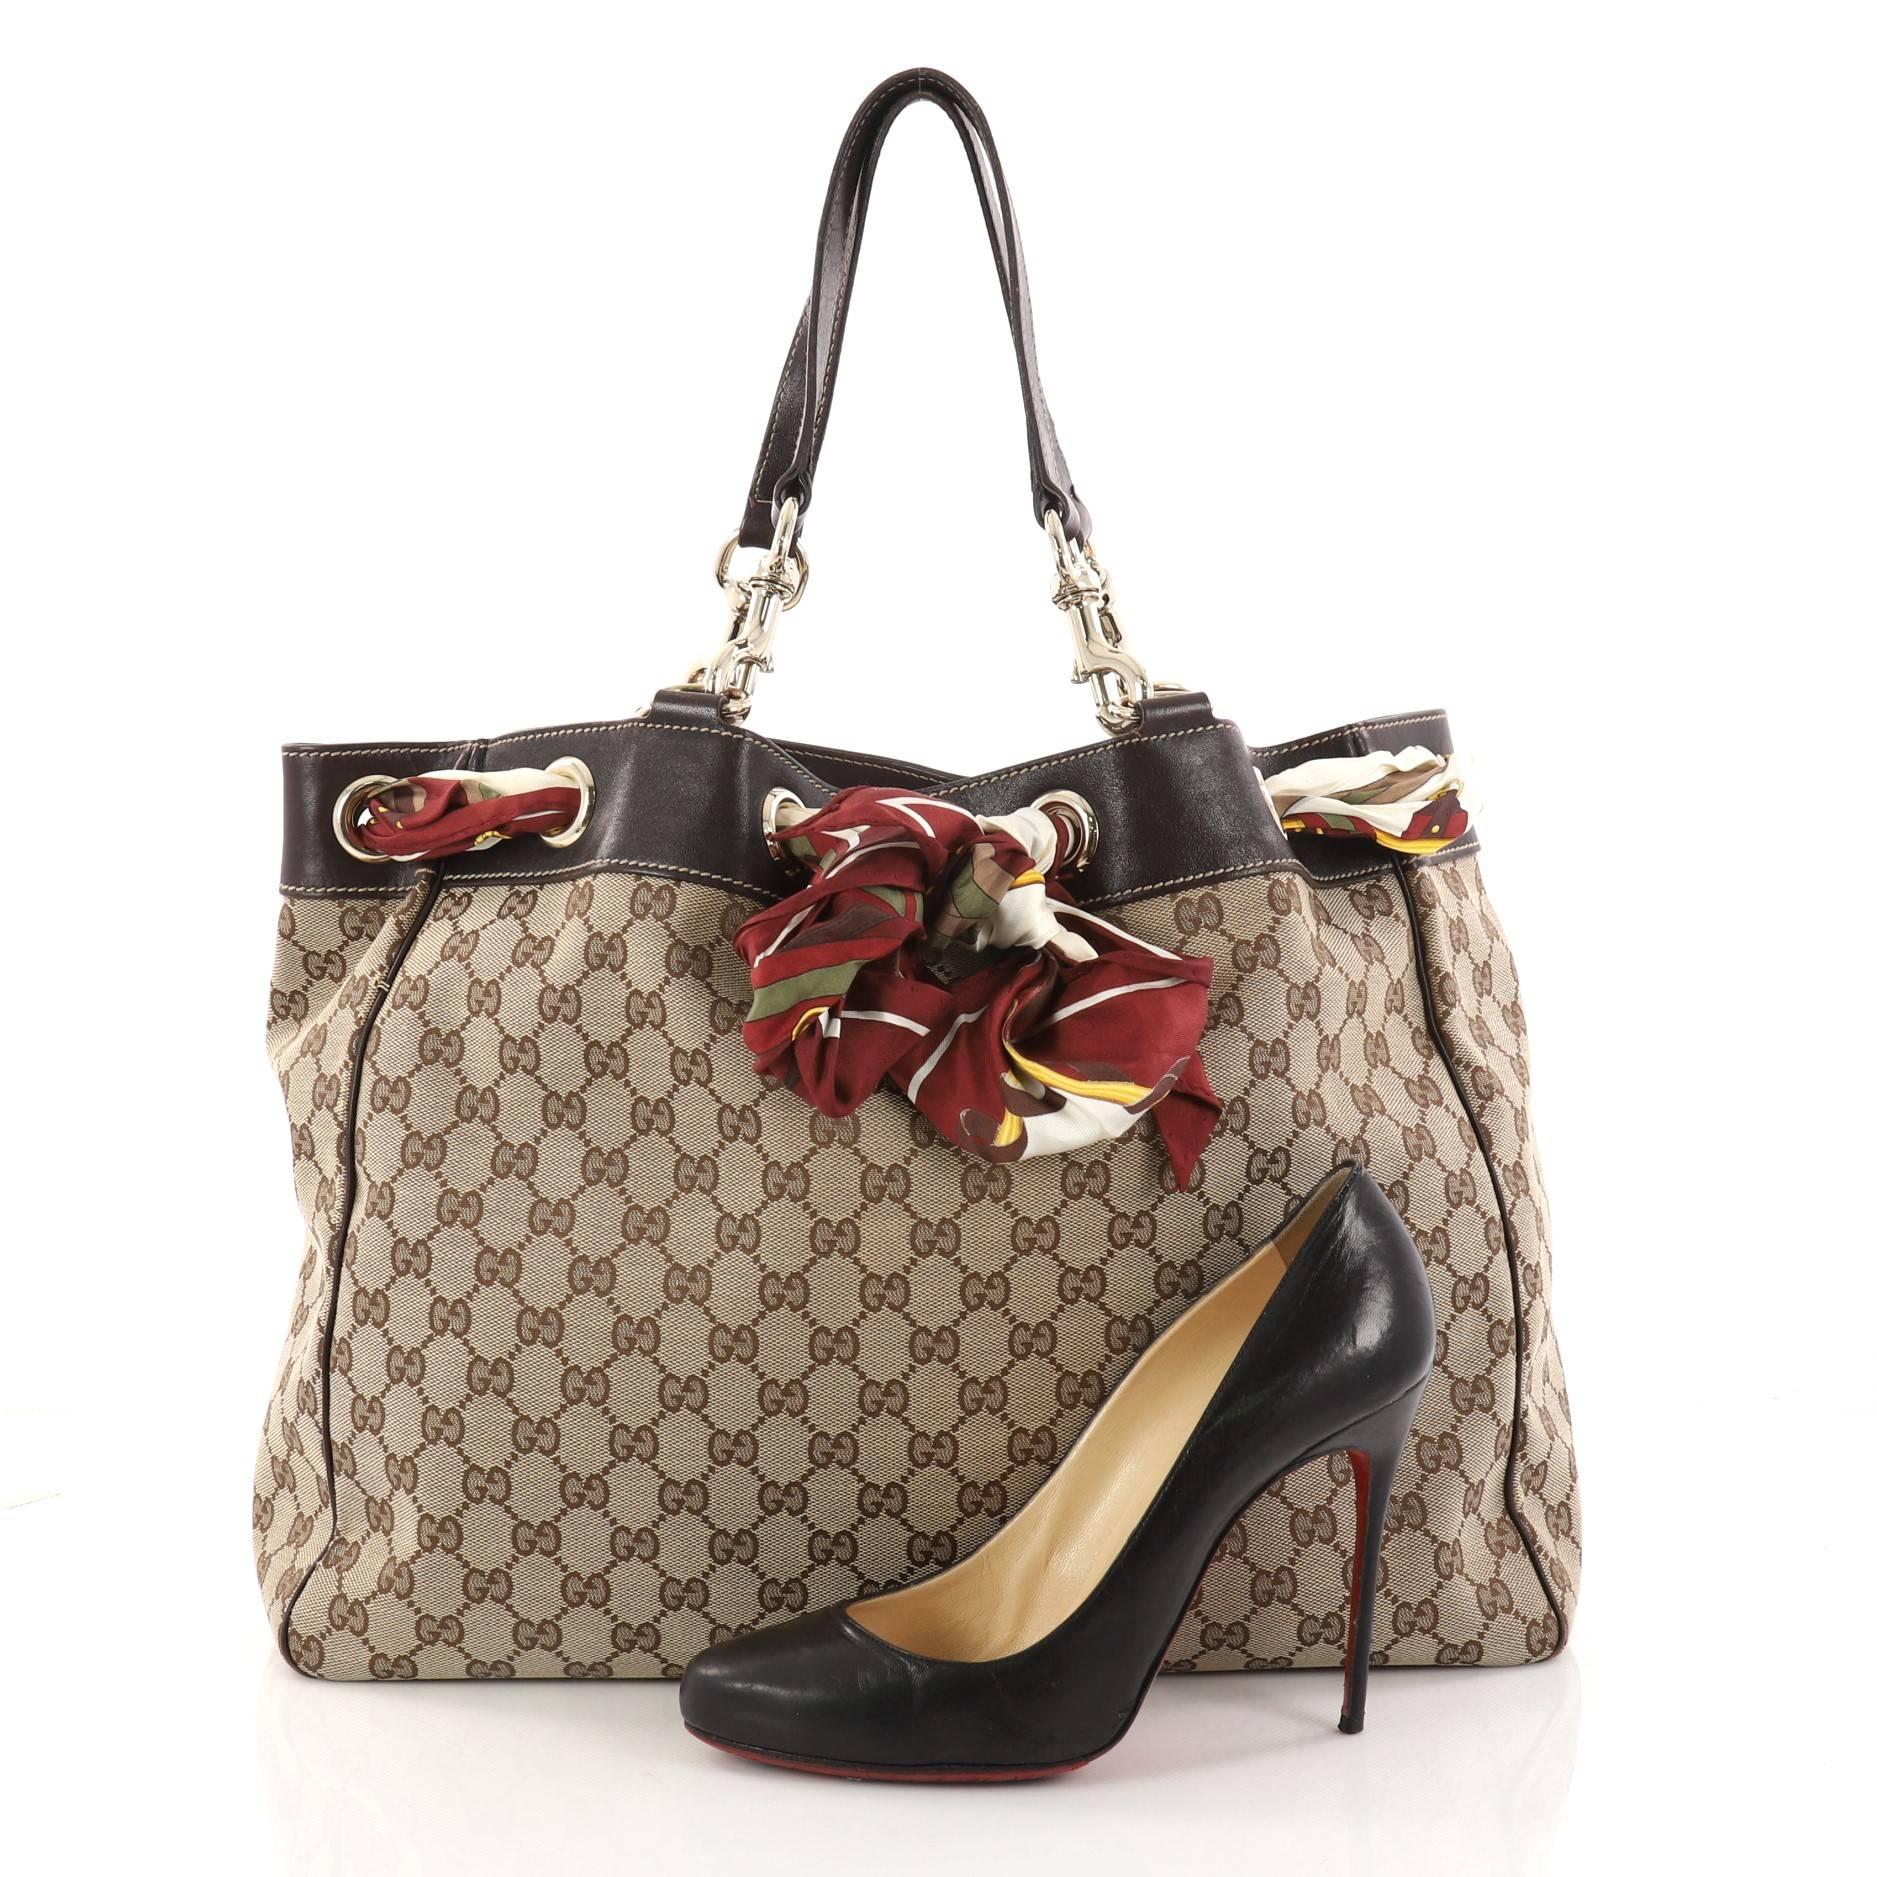 This authentic Gucci Positano Tote GG Canvas Large is a striking tote for on-the-go moments. Crafted from brown GG canvas, this chic tote features dark brown leather trims, iconic printed Gucci silk scarf threaded through grommets, dual flat leather